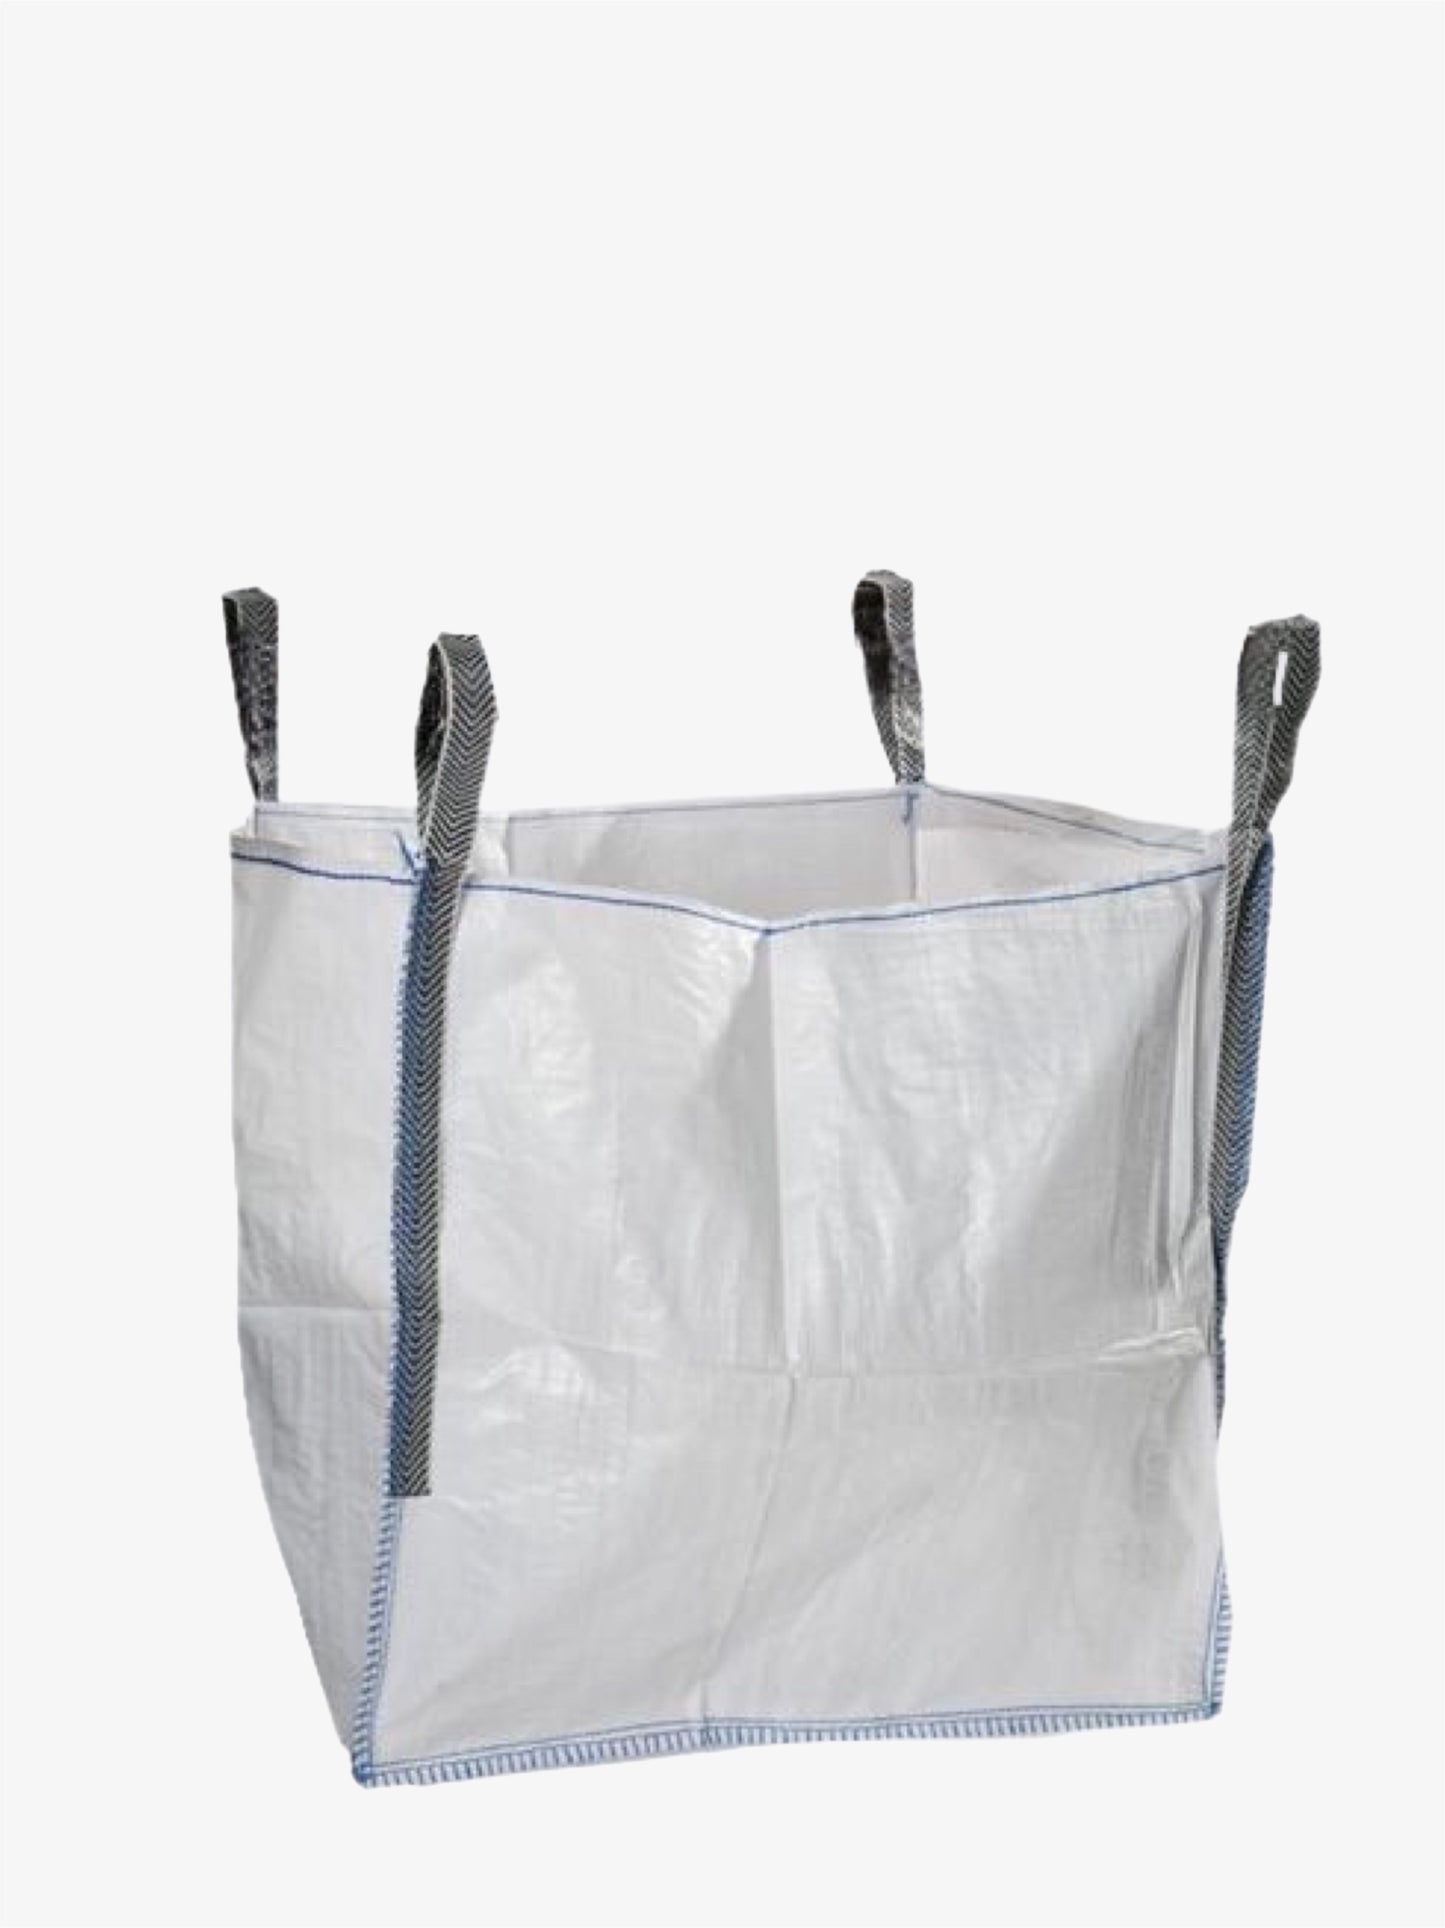 TYPE A - CLEAN UP BULK BAGS | 1000kg | Open Top | Flat Bottom | 4 LIFTING LOOPS | 10 Bags